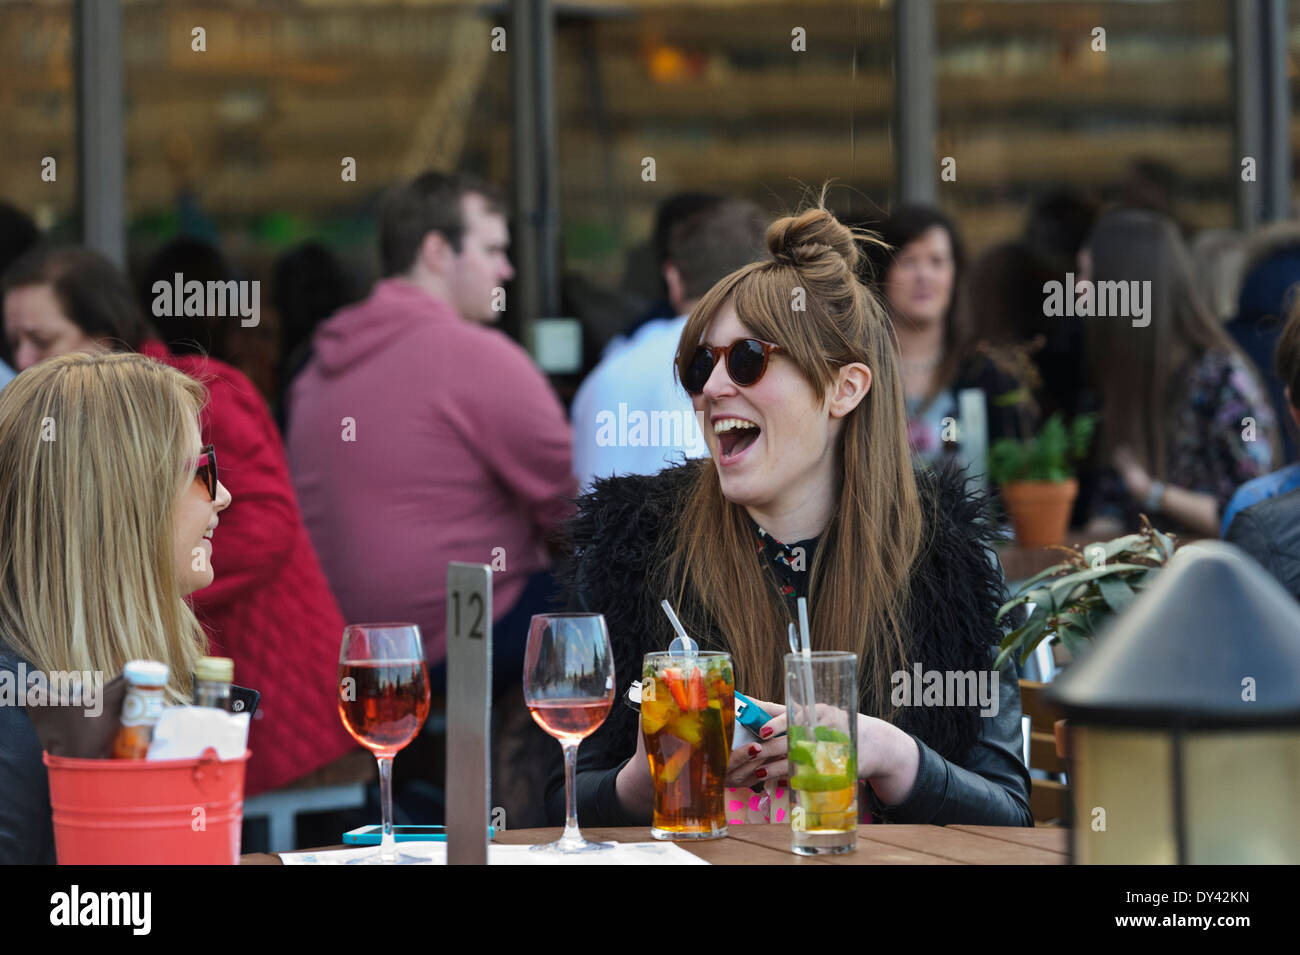 People taking advantage of the hot British weather to socialize with friends, drinking and eating by the Thames river, London. Stock Photo